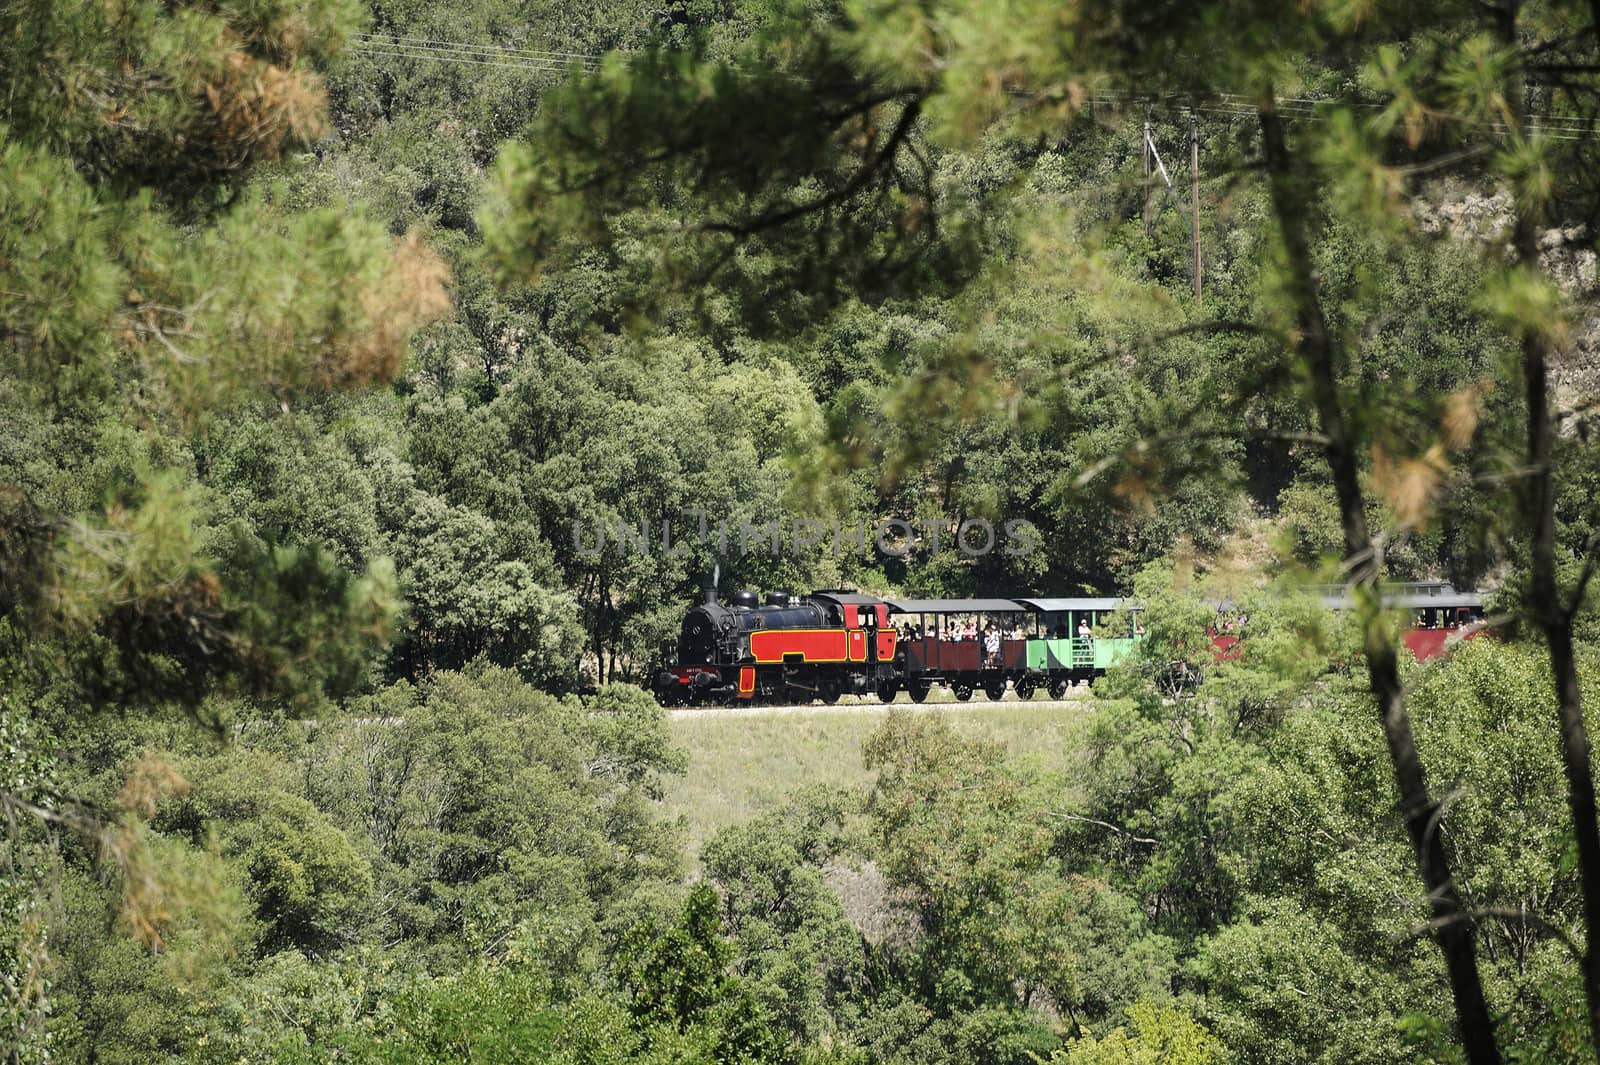 Little tourist steam train from Anduze by gillespaire